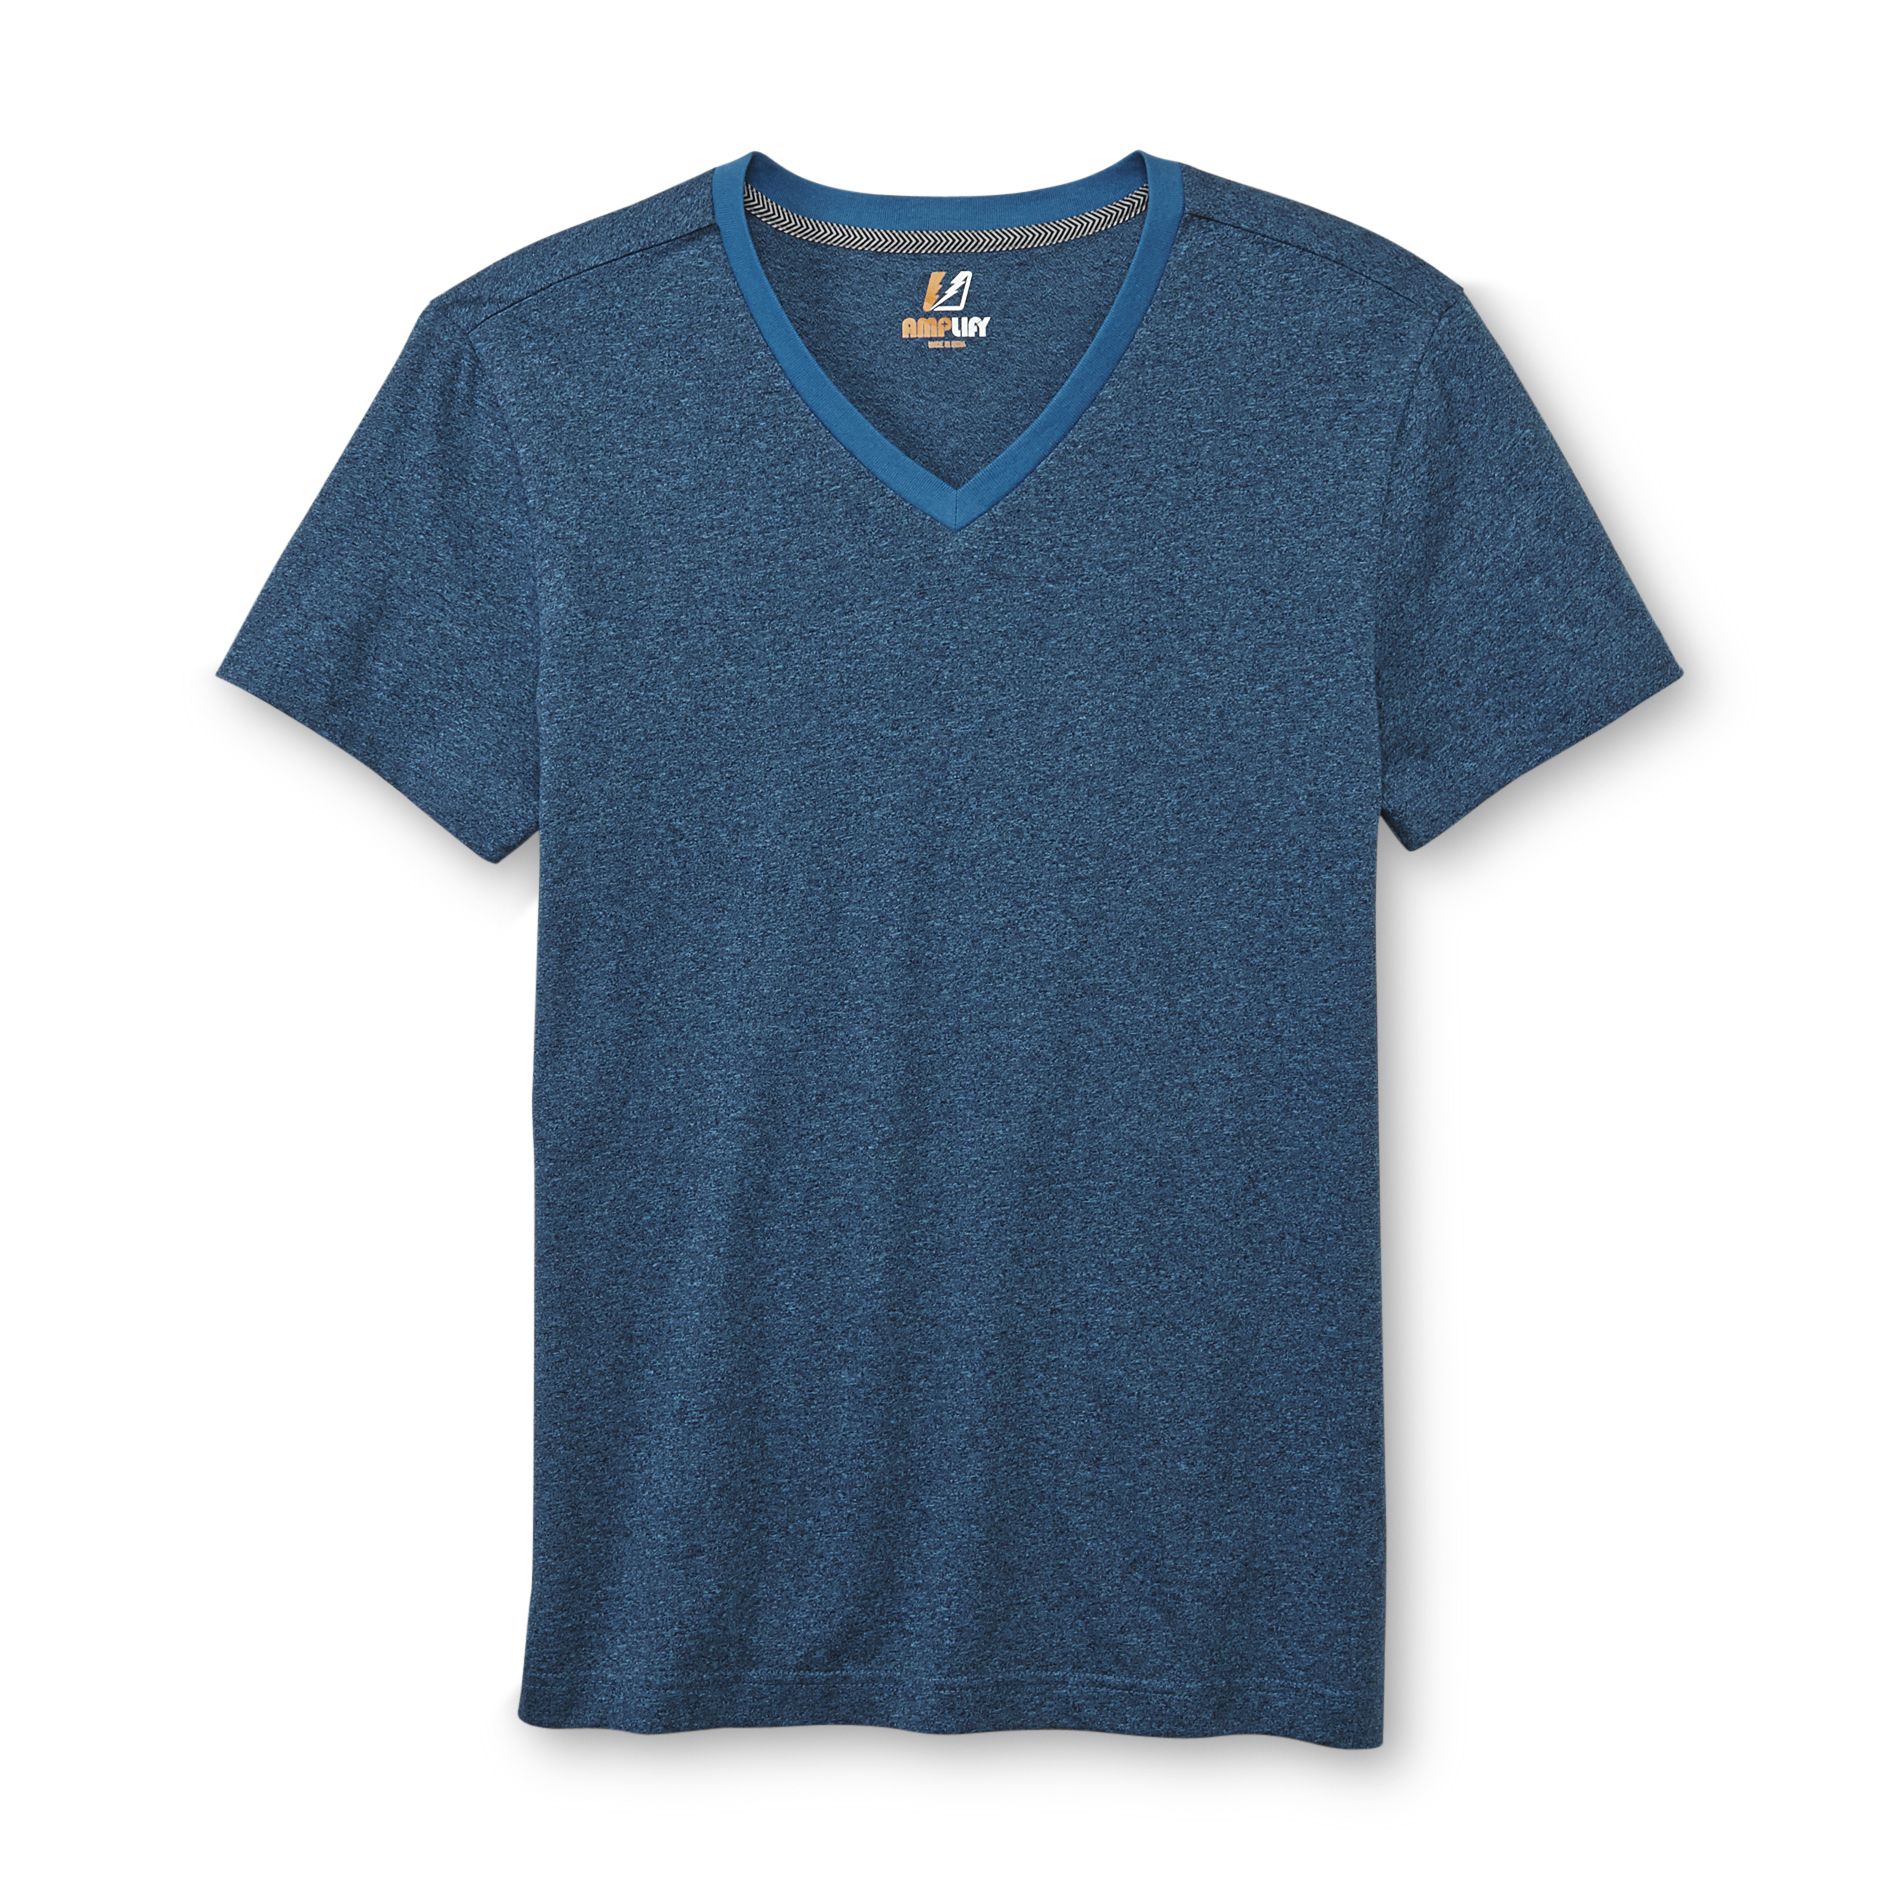 Amplify Young Men's V-Neck T-Shirt - Heathered